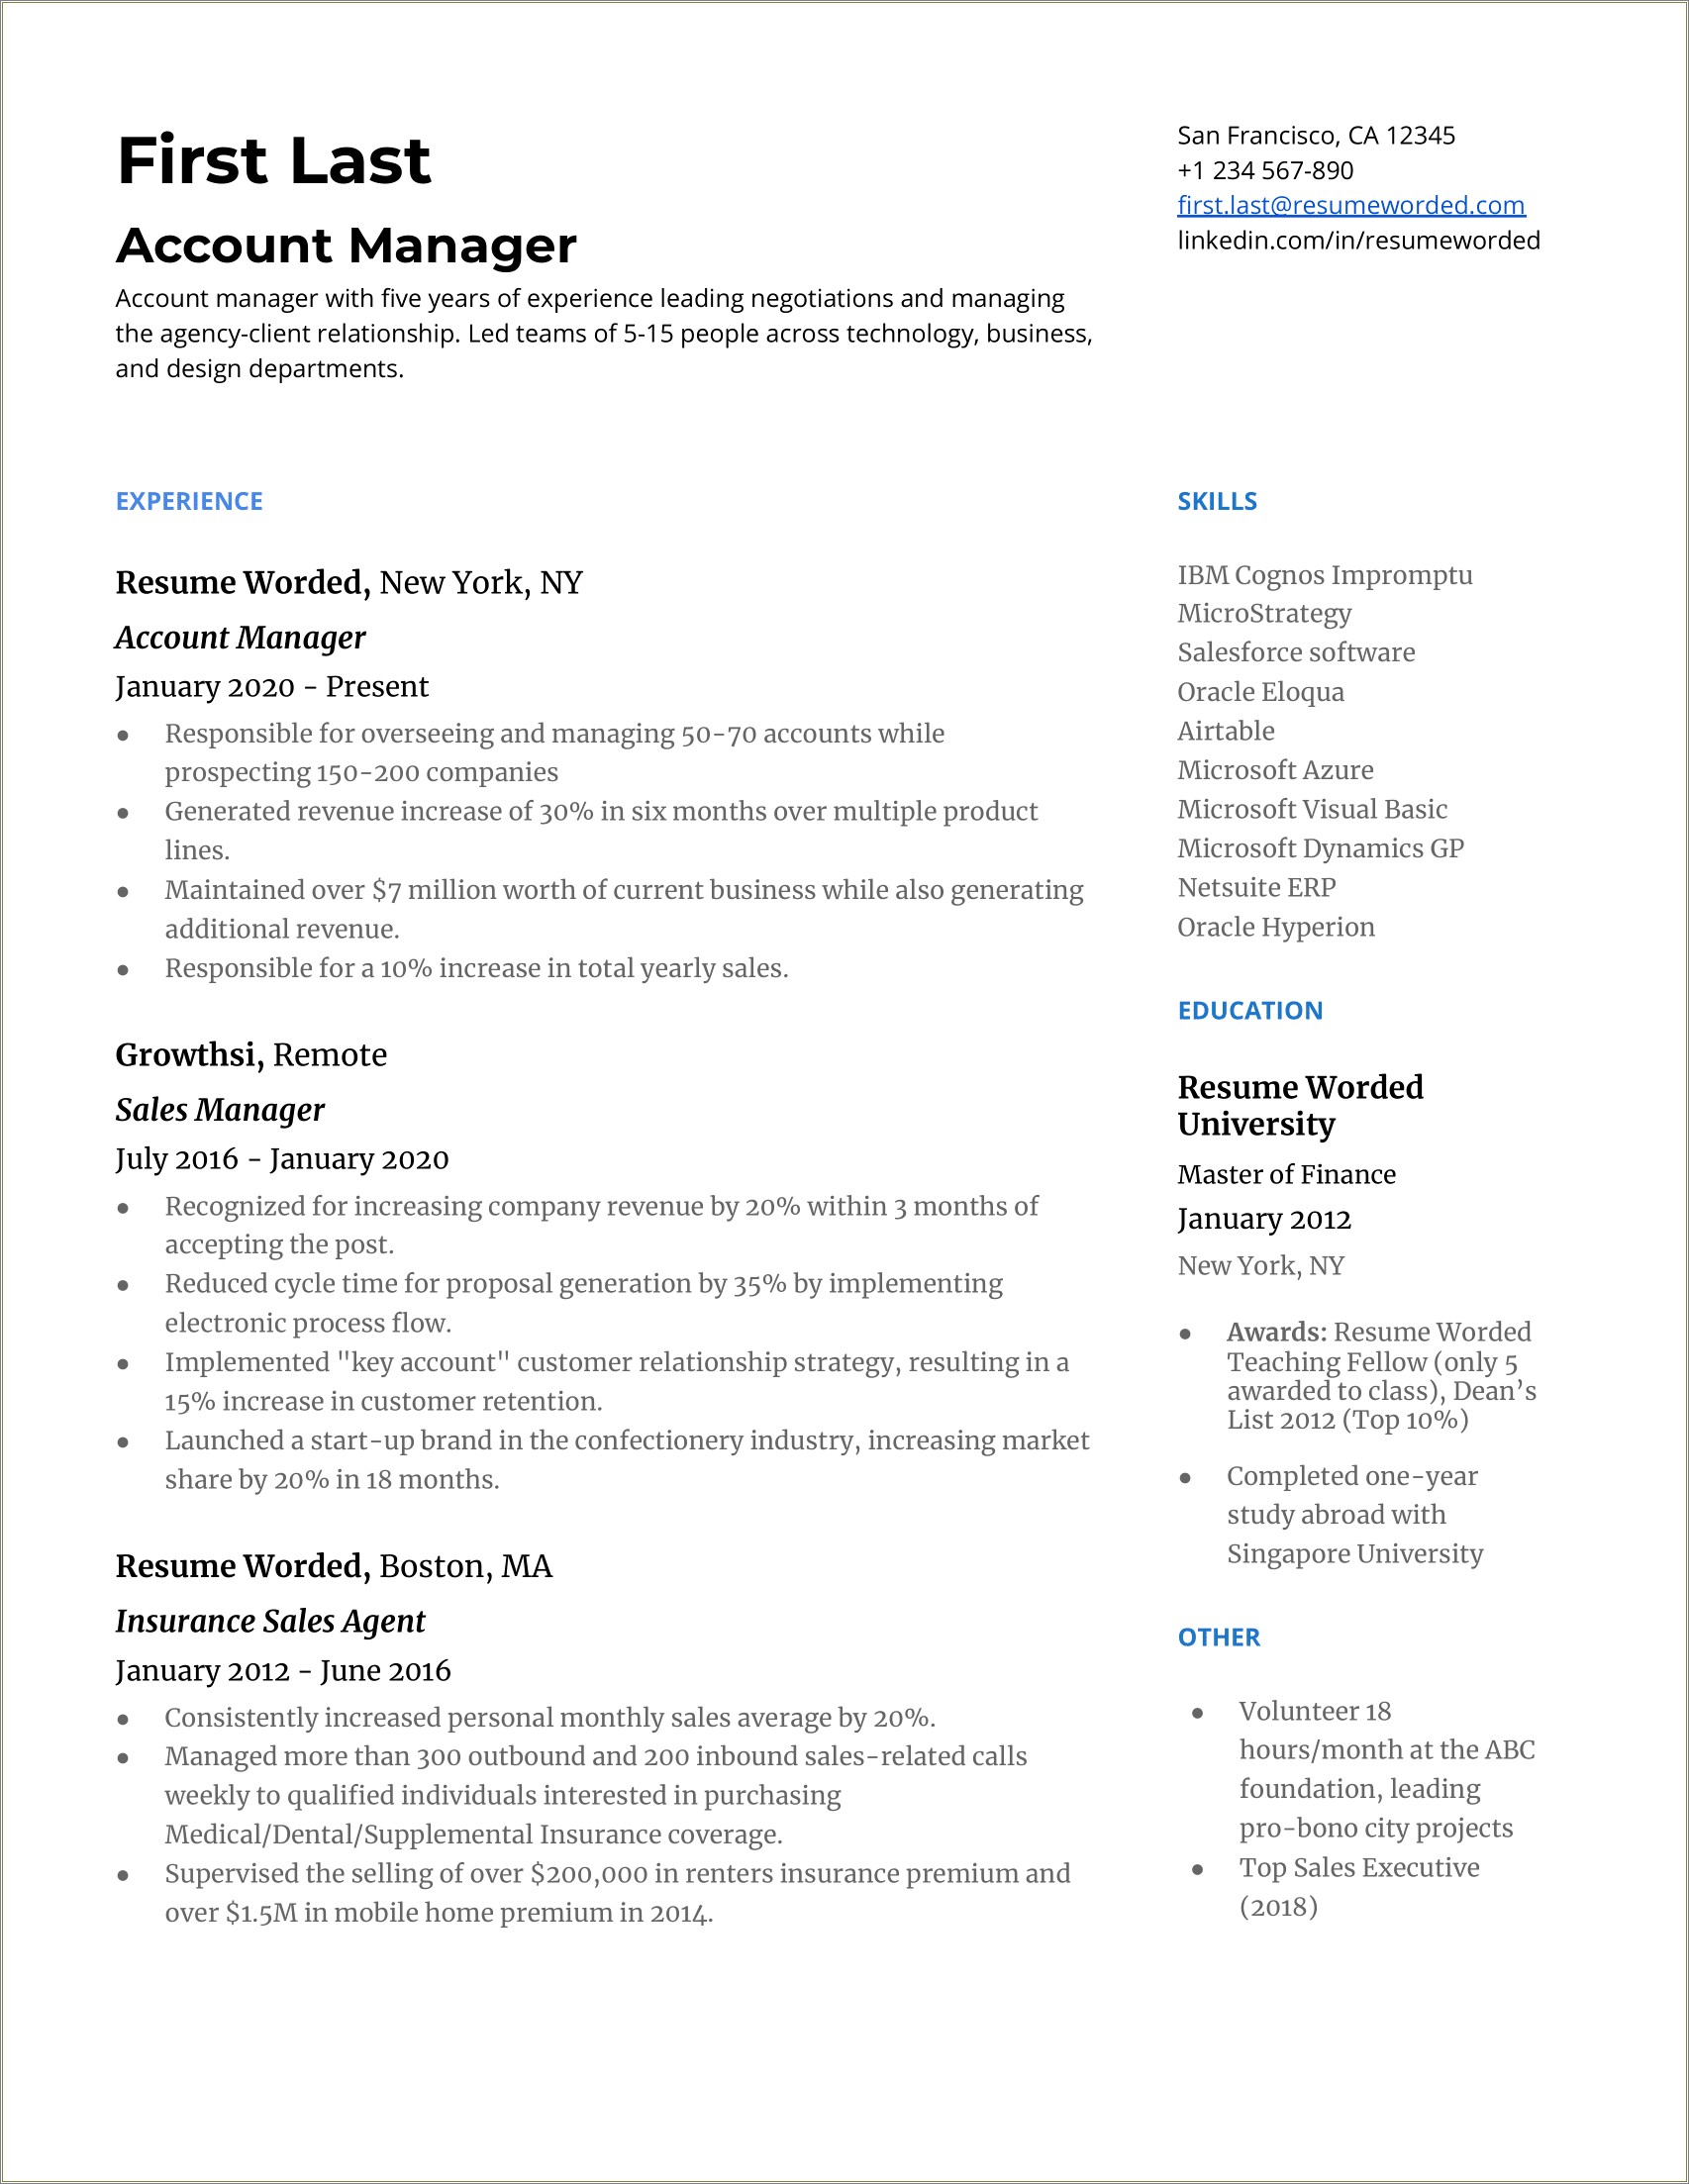 Examples Of Automotive Service Manager Resume